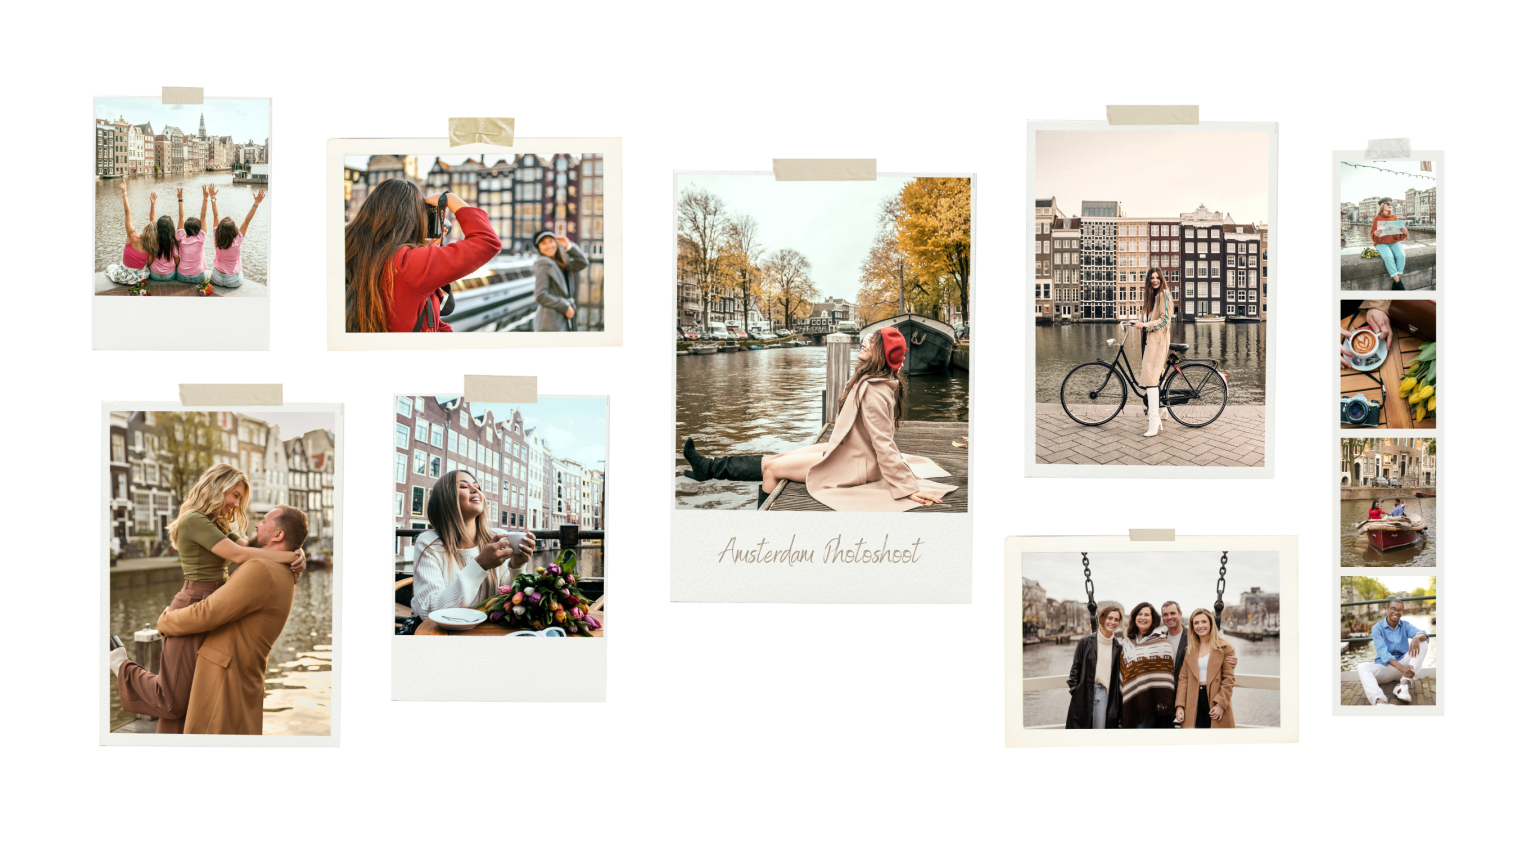 Amsterdam Photoshoot featuring solo travelers, couples, families, and friends.